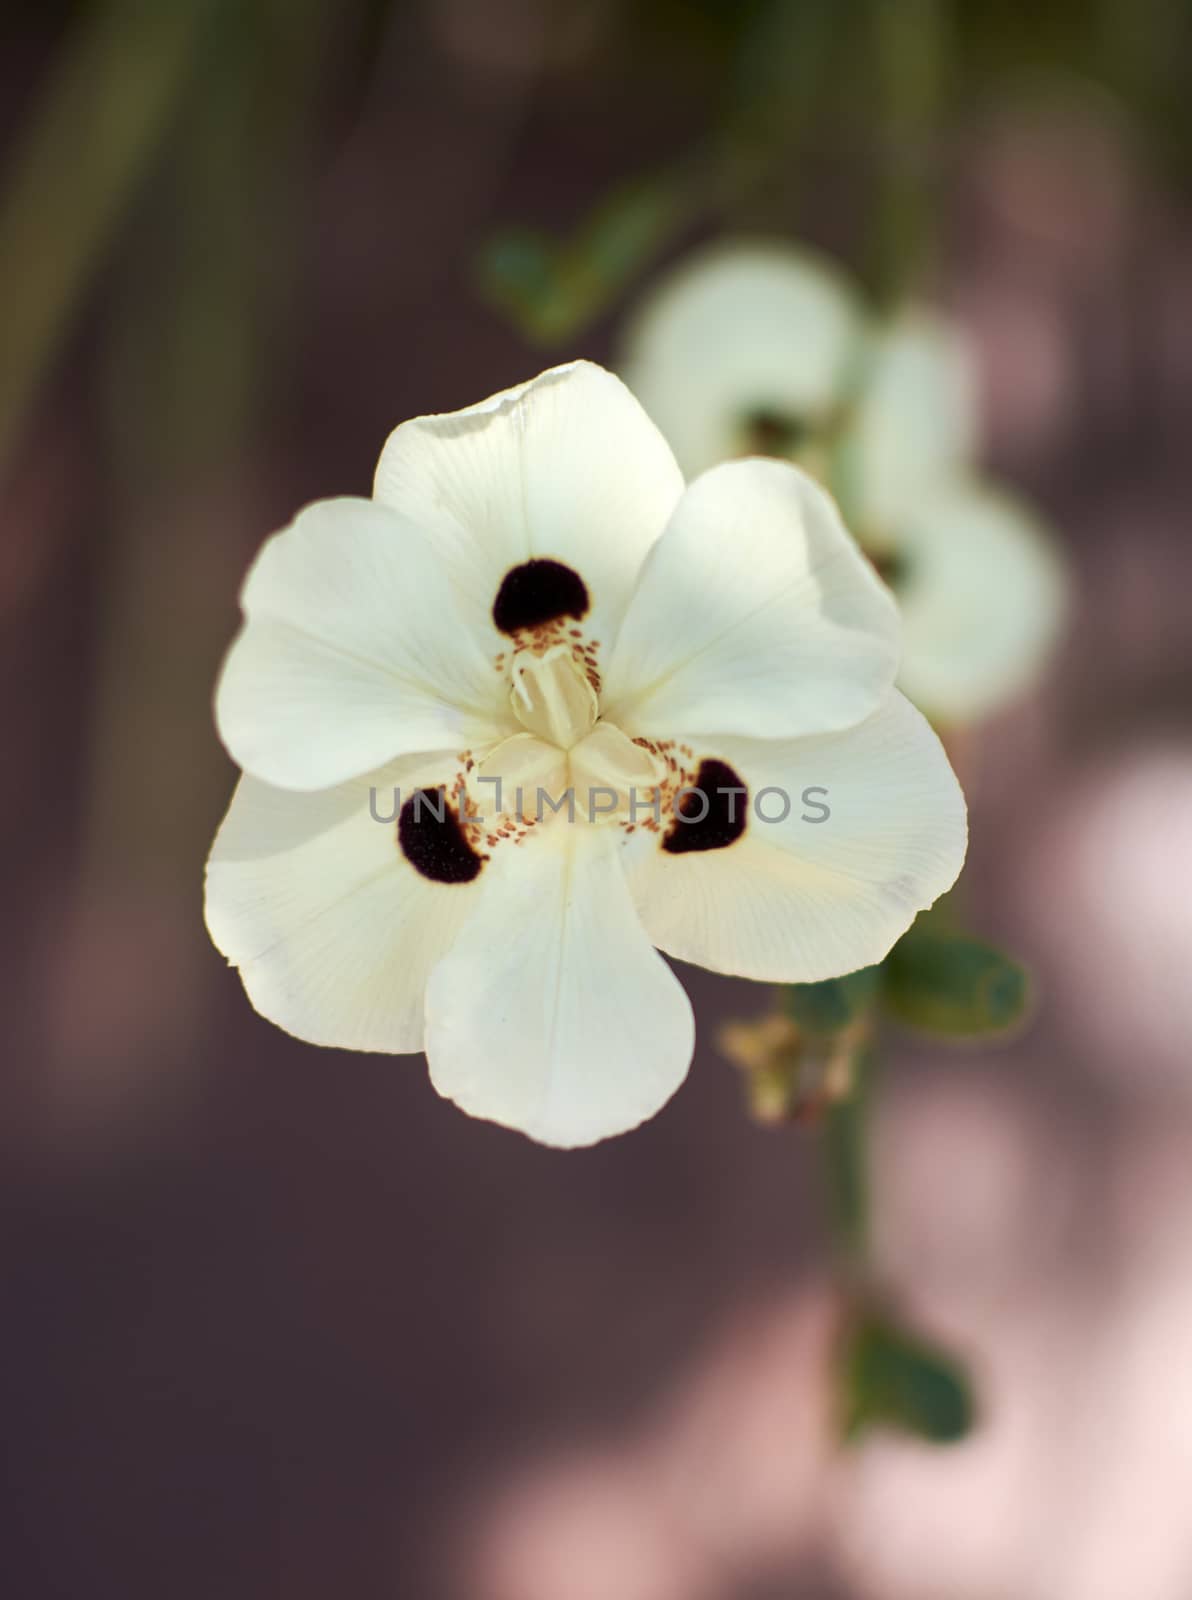 White flower with black petals, by raul_ruiz